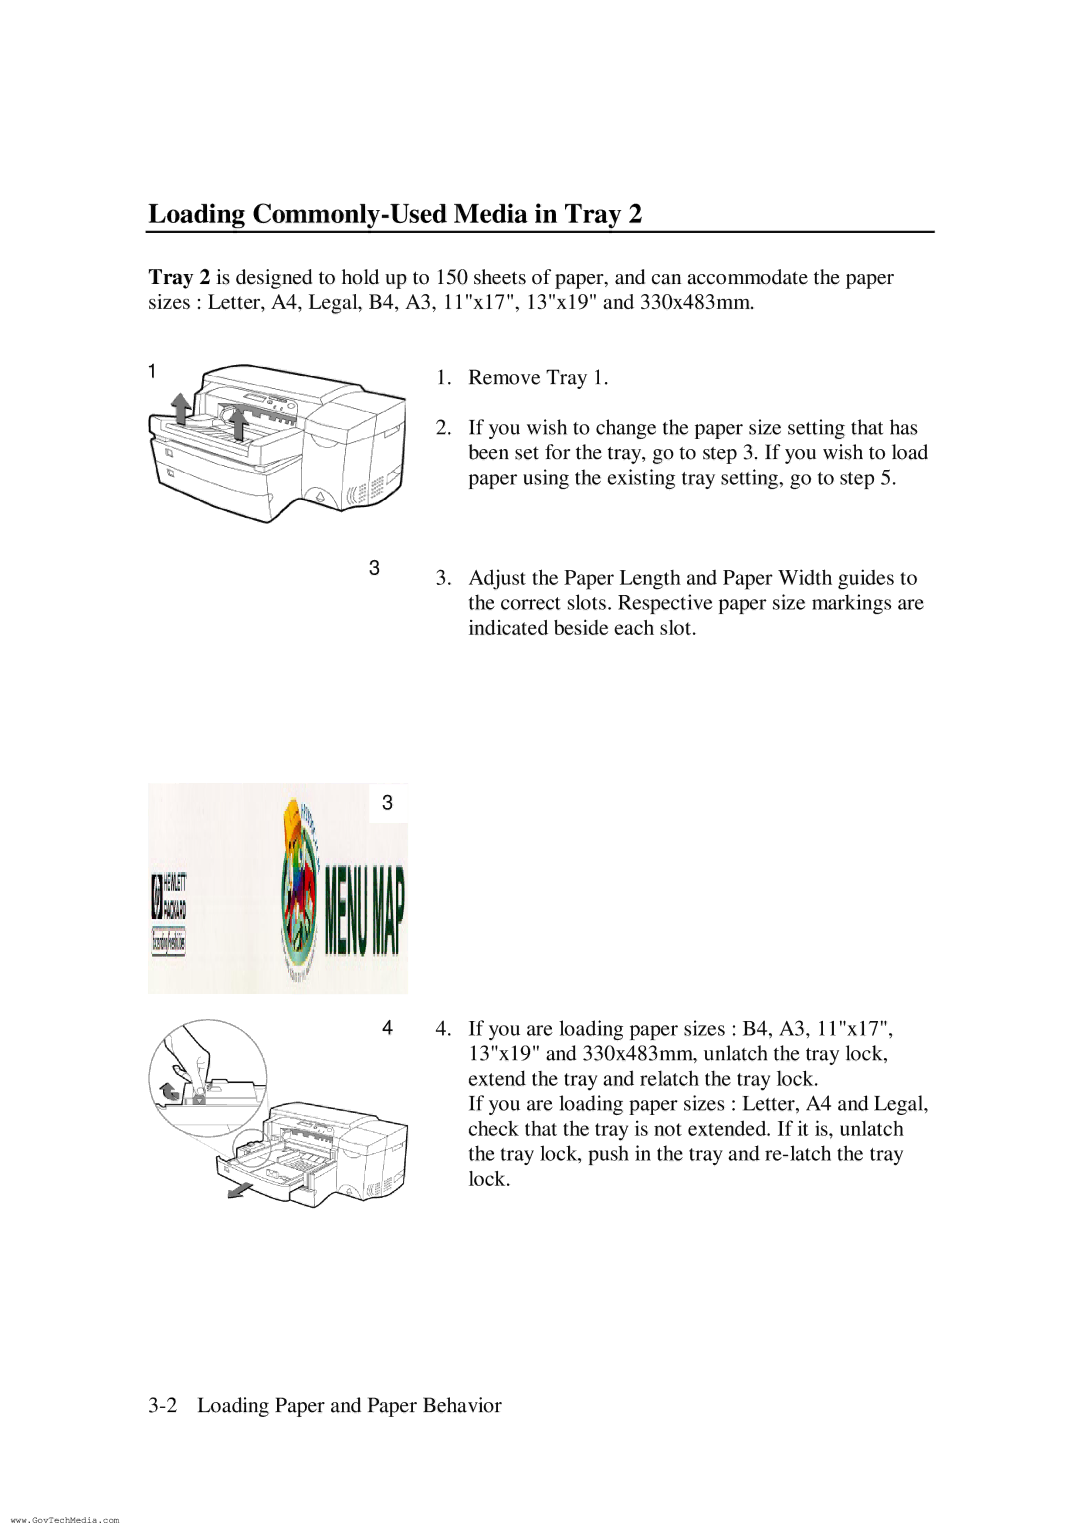 HP ColorPro CAD manual Loading Commonly-Used Media in Tray 